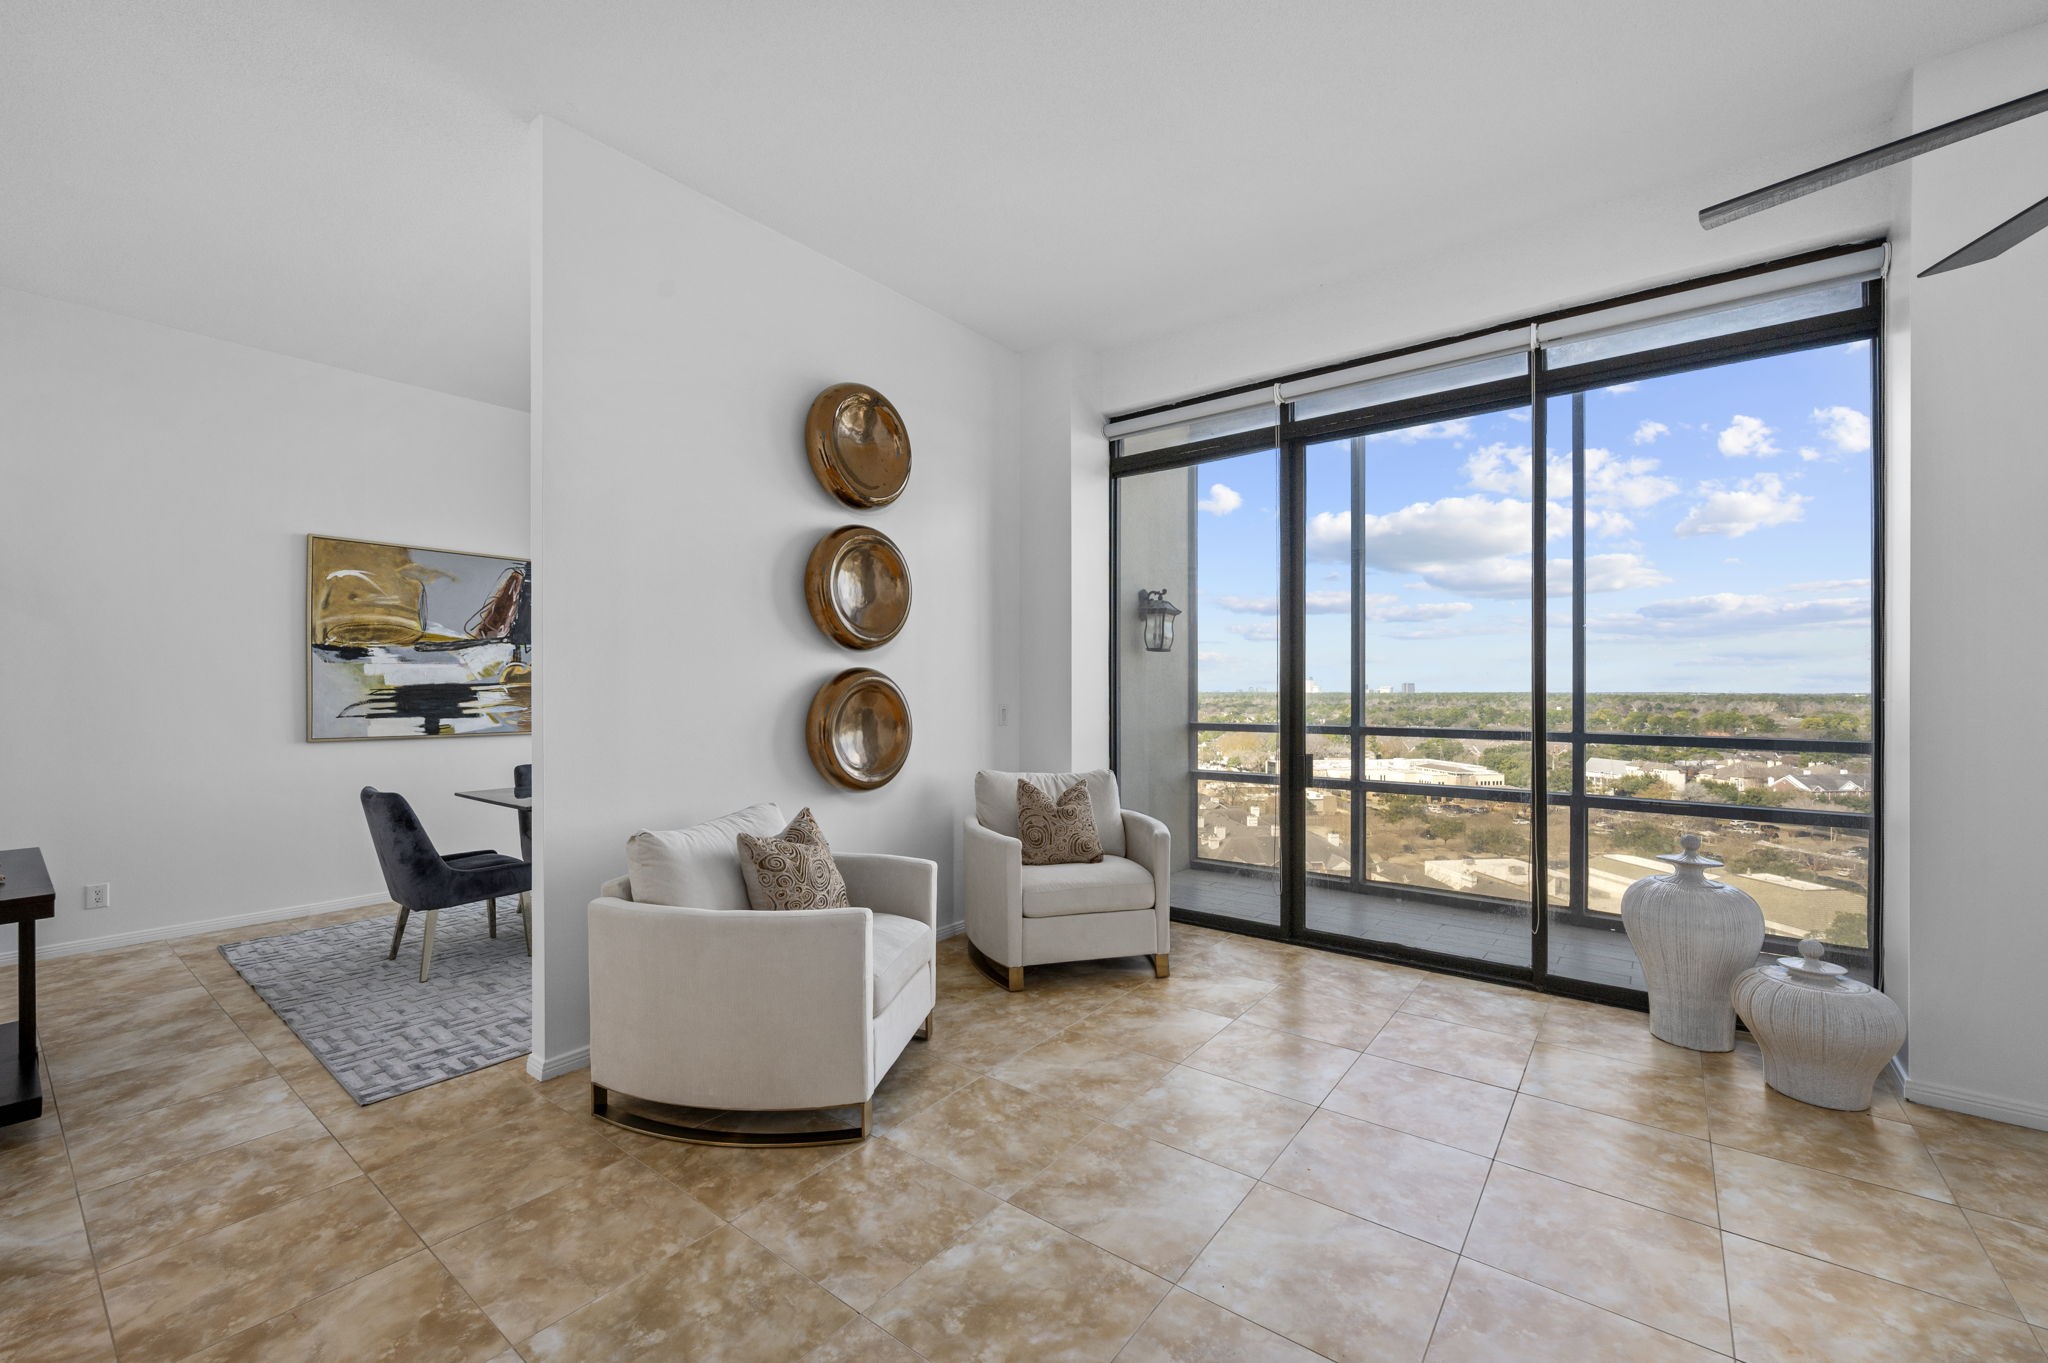 Additional sitting area off the living, overlooking the private balcony and westward skyline views.